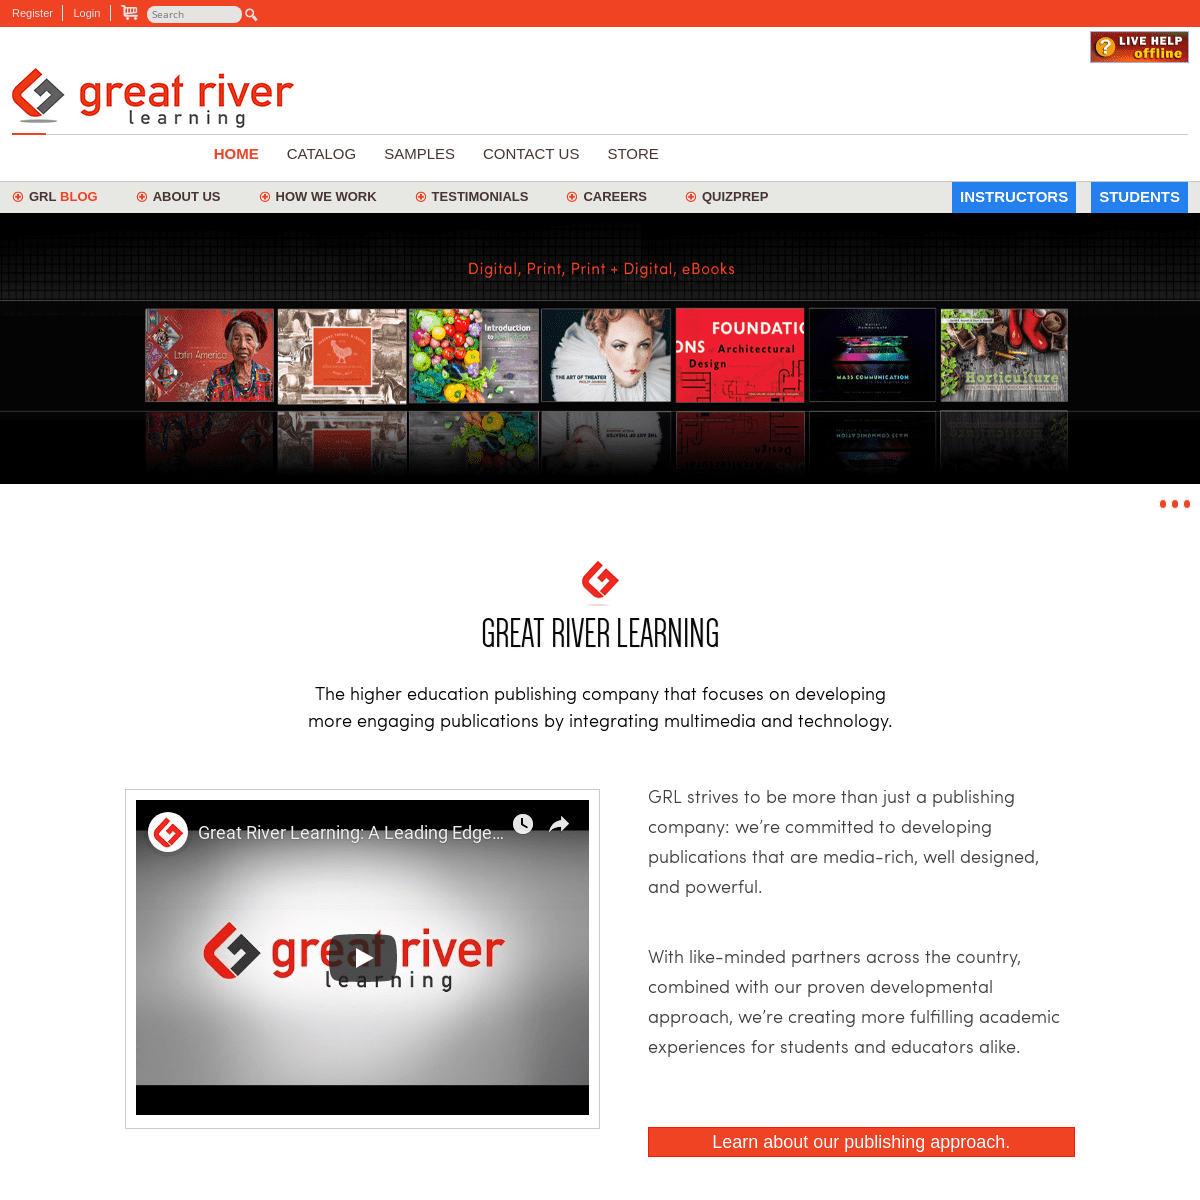 A complete backup of greatriverlearning.com